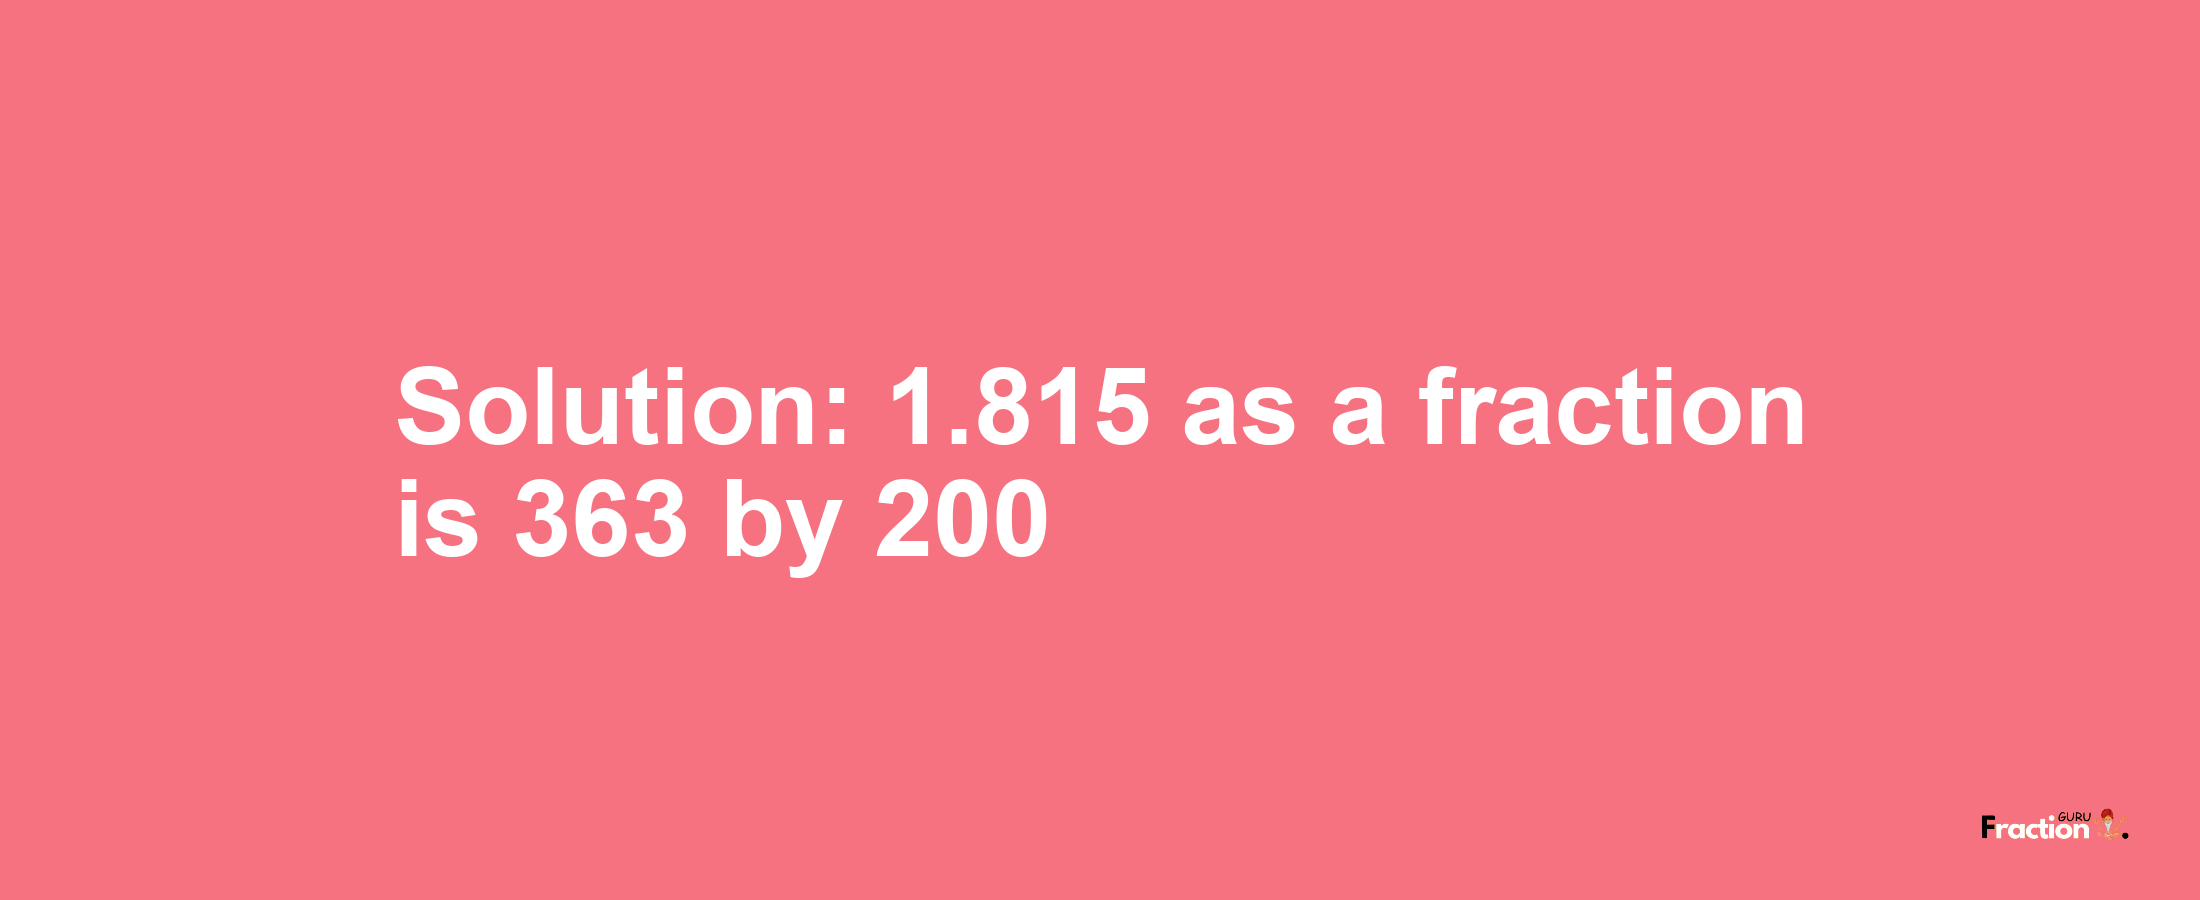 Solution:1.815 as a fraction is 363/200